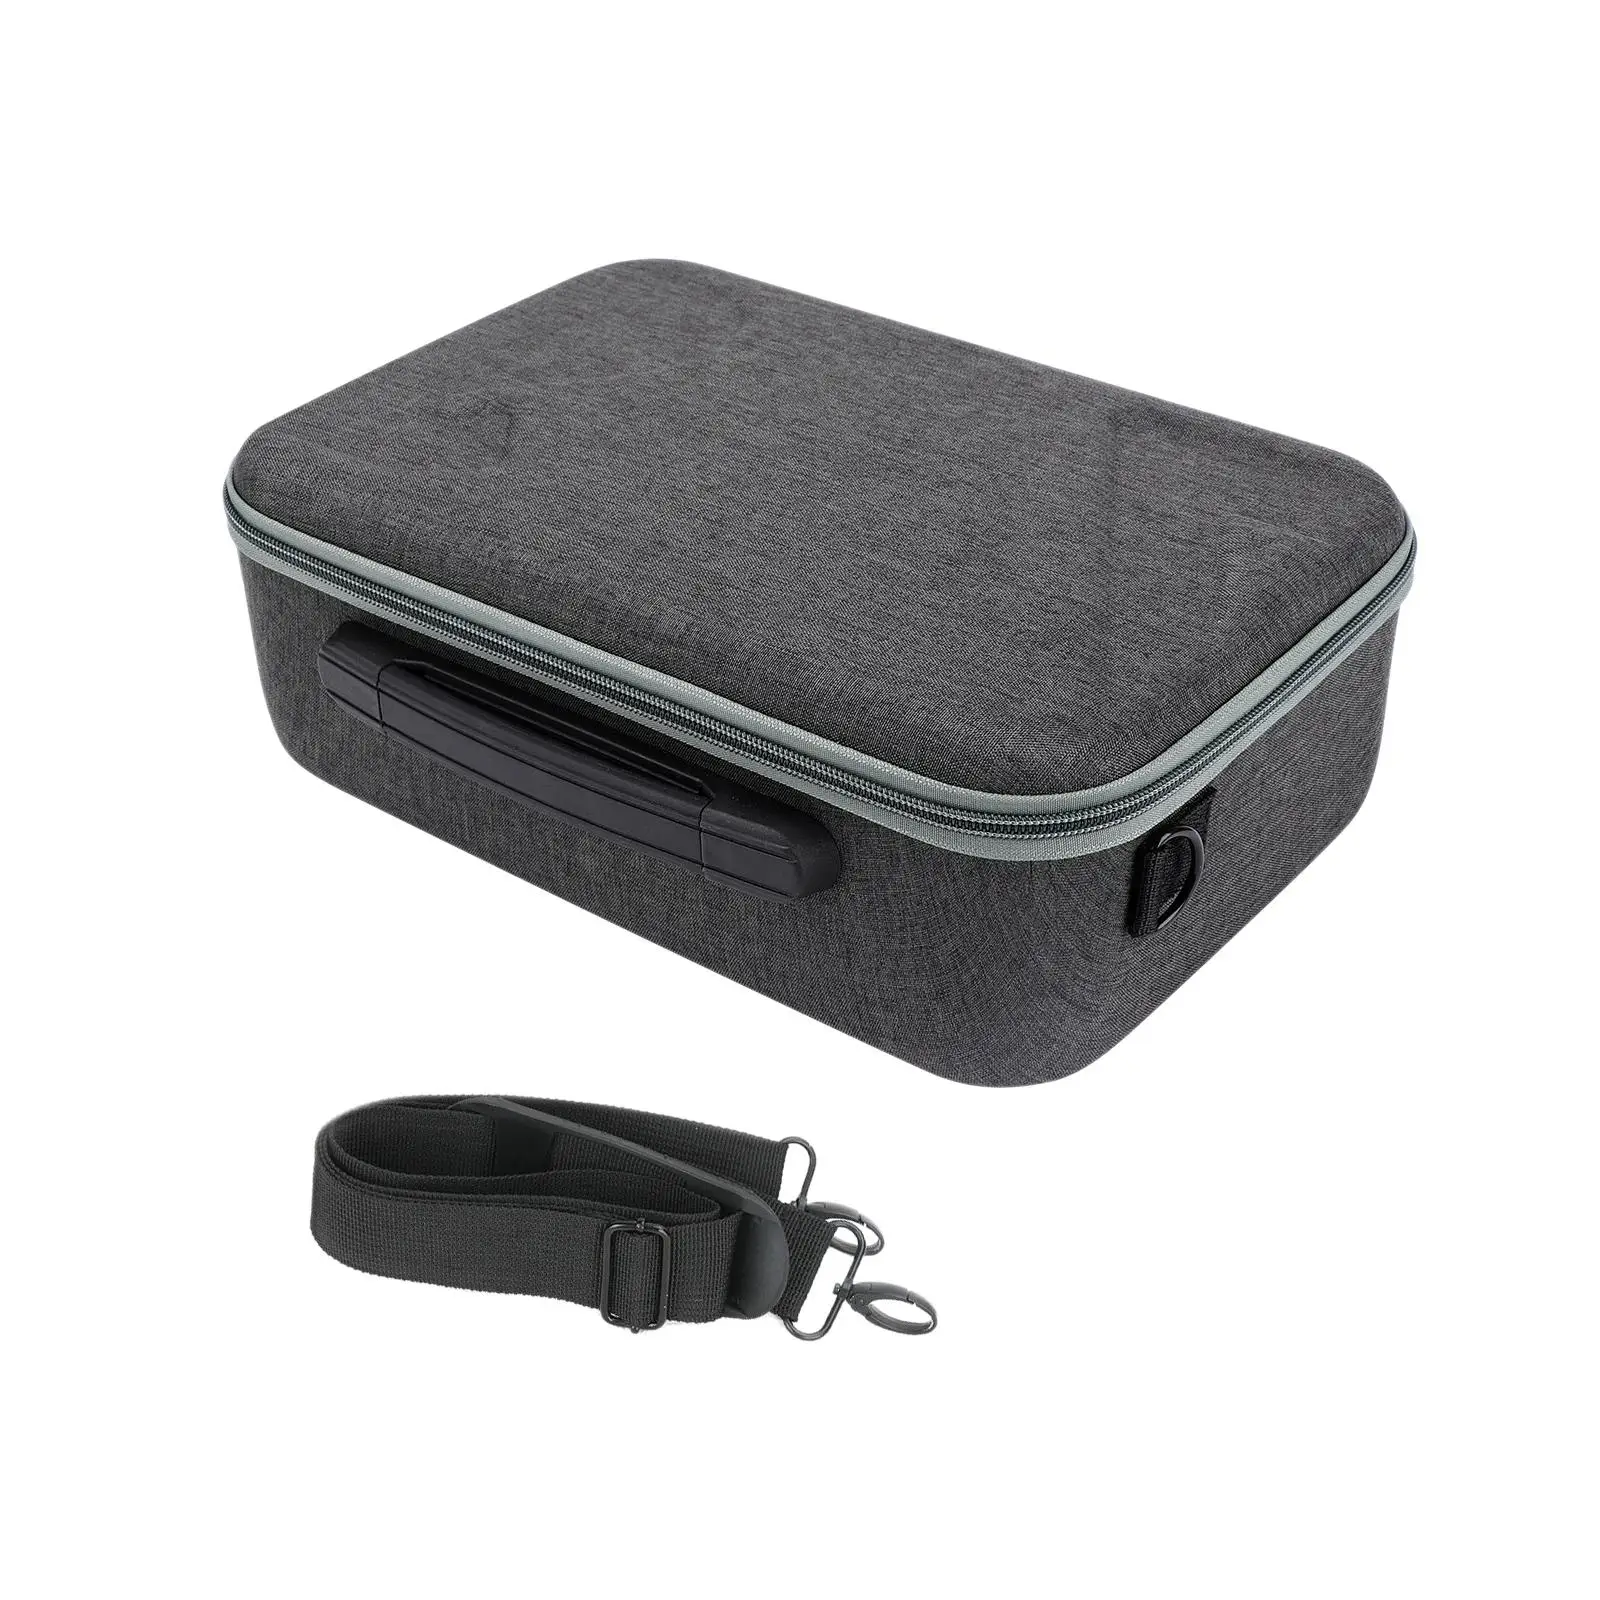 Shockproof Carrying Case for RS 3 Mini Convenient to Carry Color Black EVA Top Cover